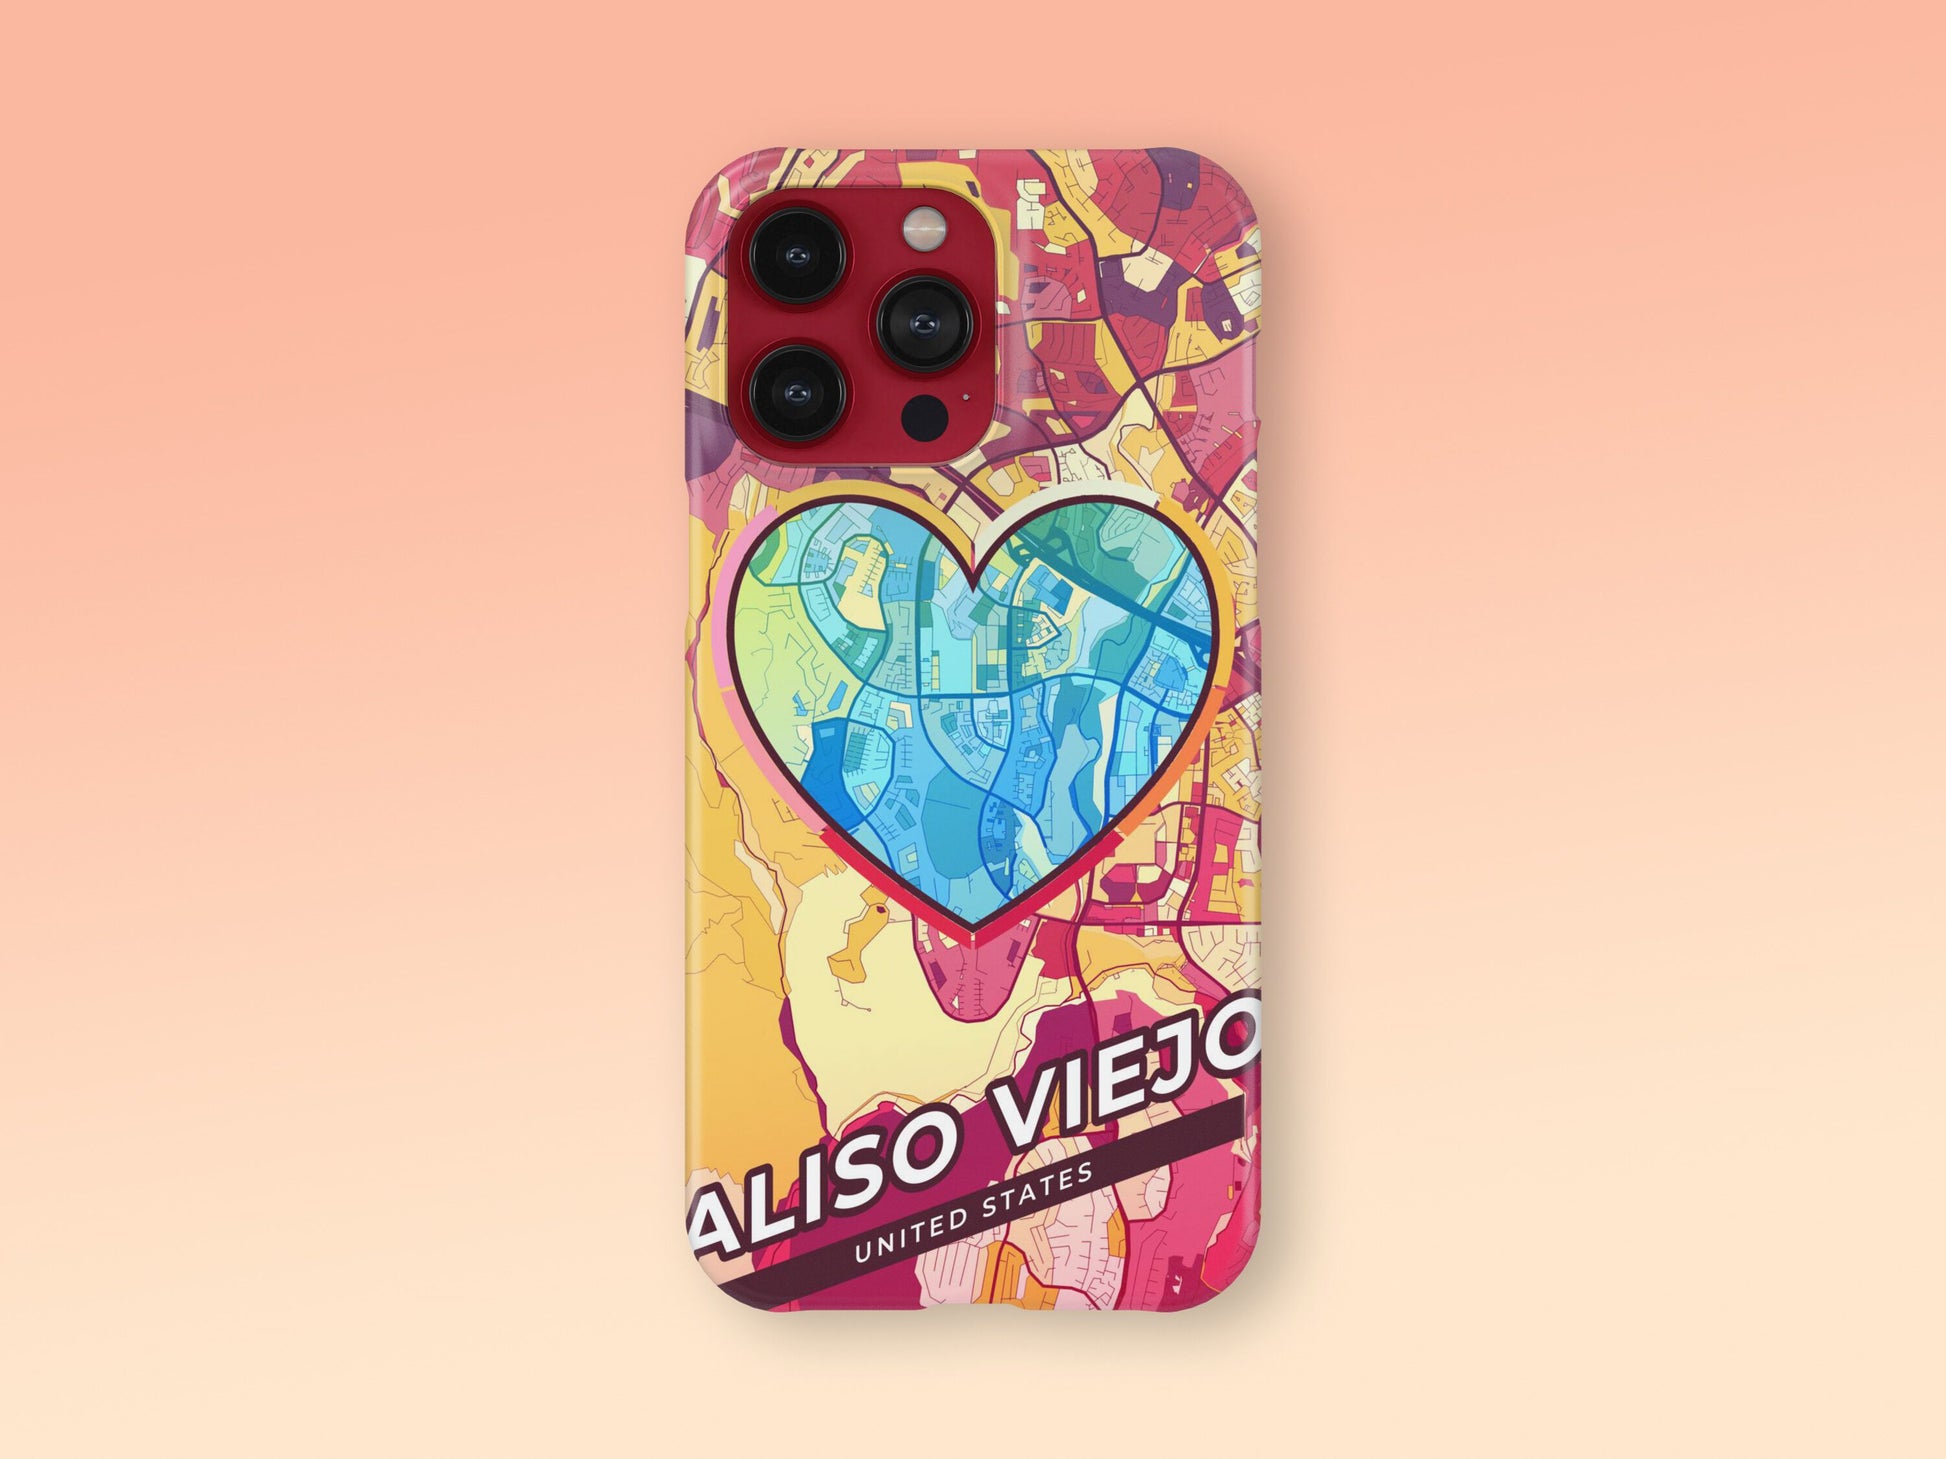 Aliso Viejo California slim phone case with colorful icon. Birthday, wedding or housewarming gift. Couple match cases. 2